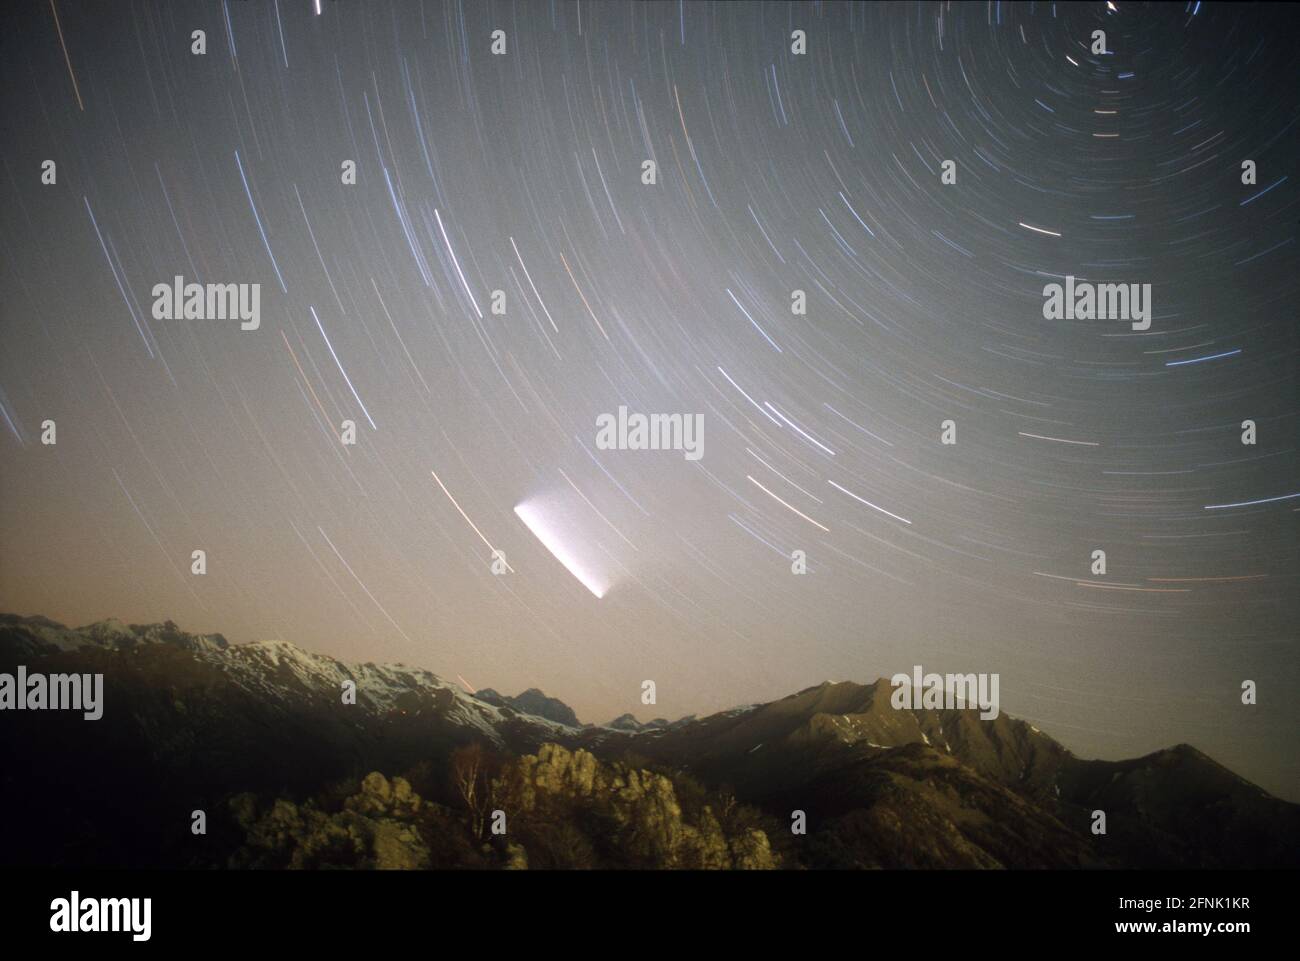 Hale Bopp comet in the sky of Susa Valley, Italy Stock Photo